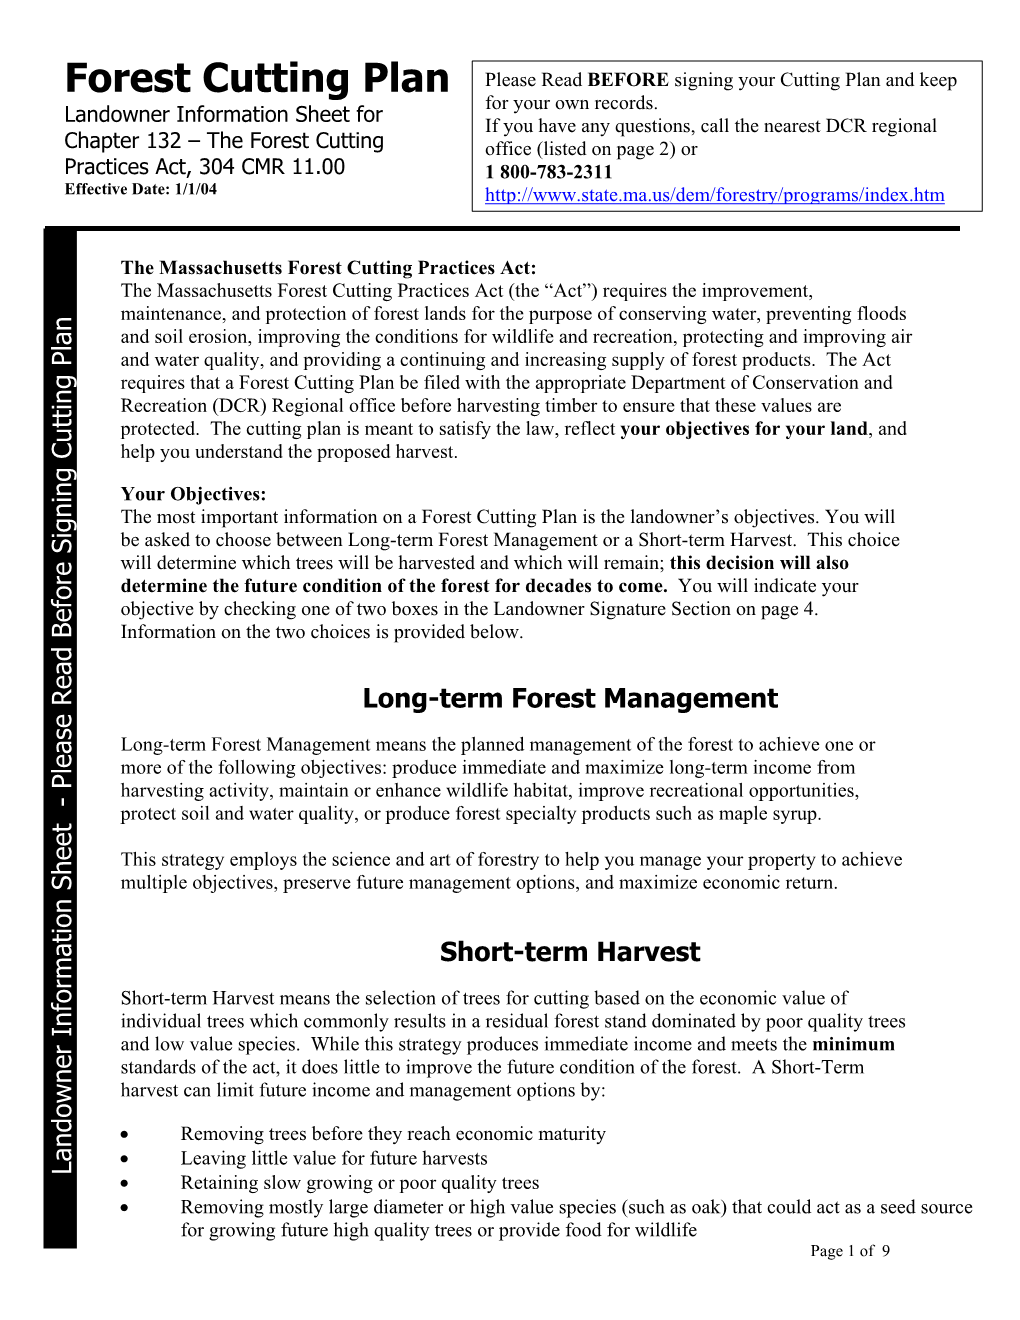 Forest Cutting Plan Information Sheet on Page One, Indicate Your Objective by Checking the Appropriate Box Below